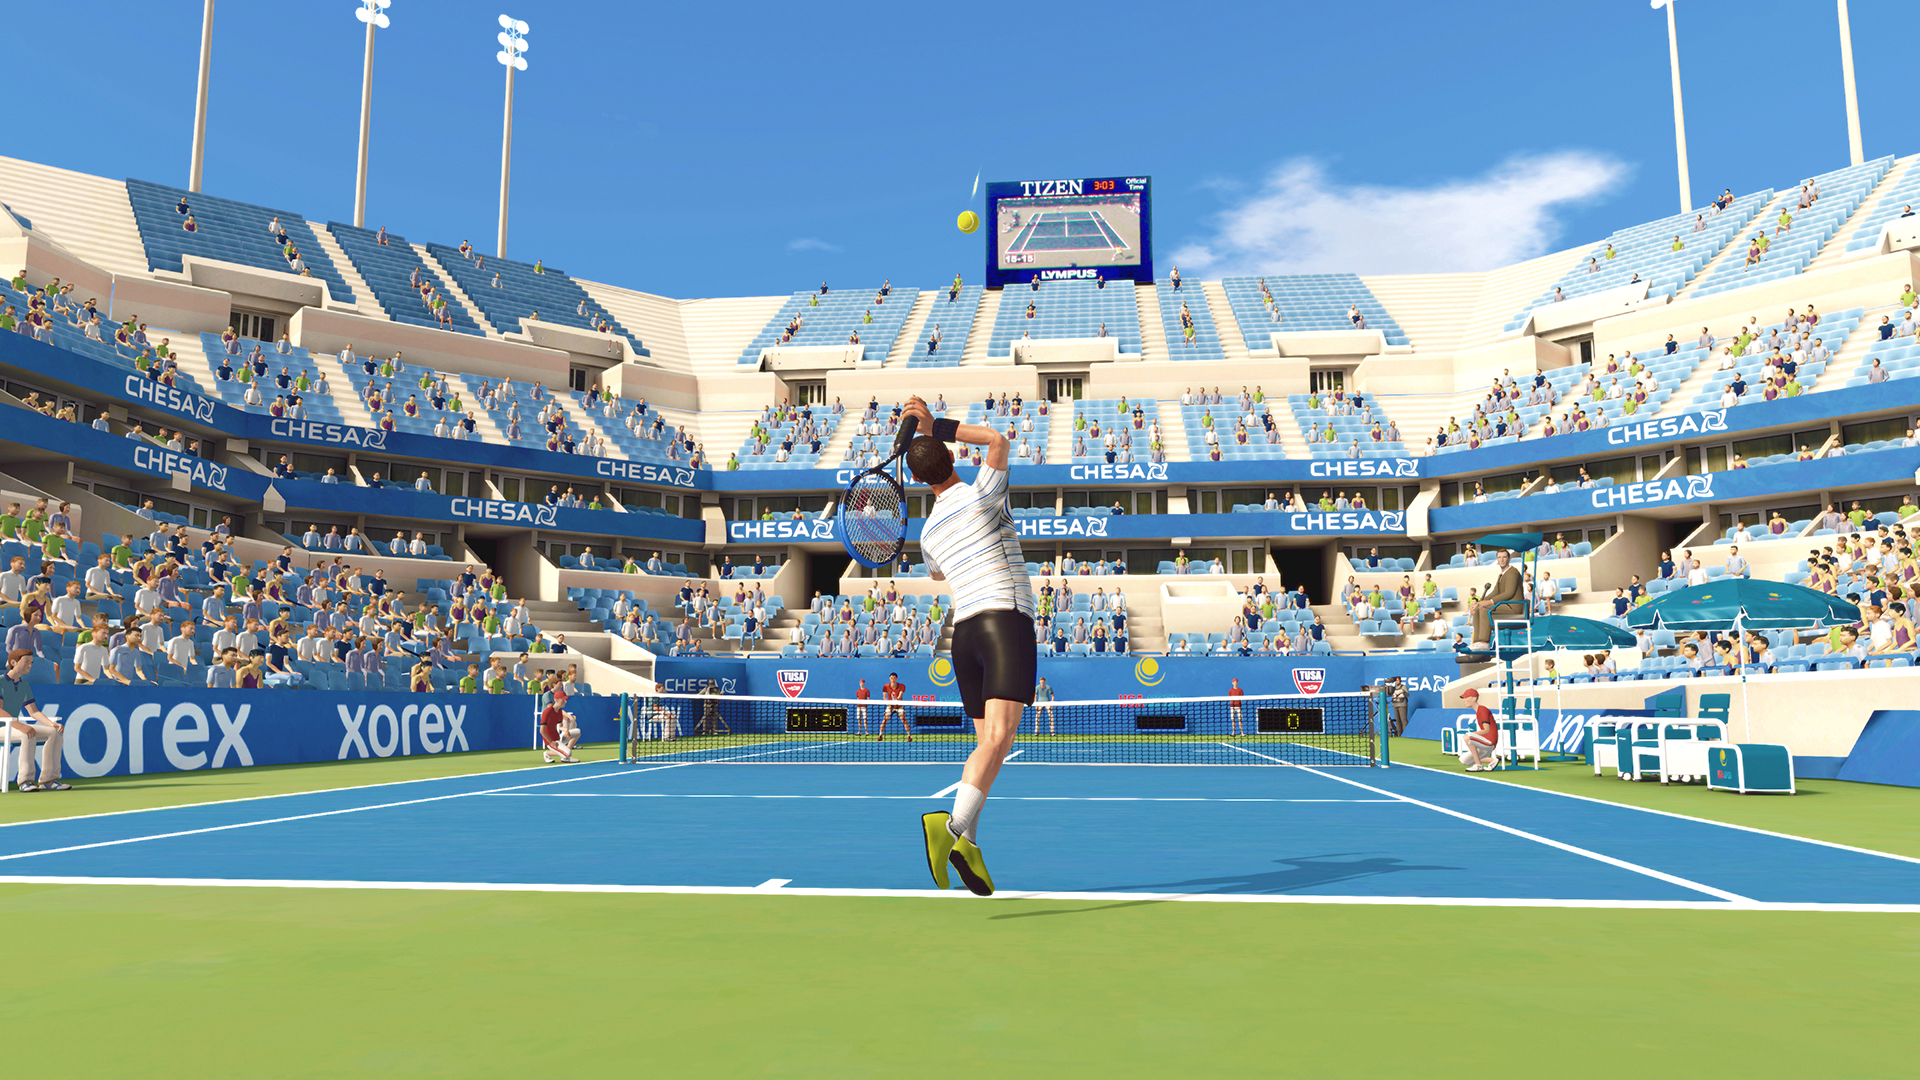 Find the best computers for First Person Tennis - The Real Tennis Simulator